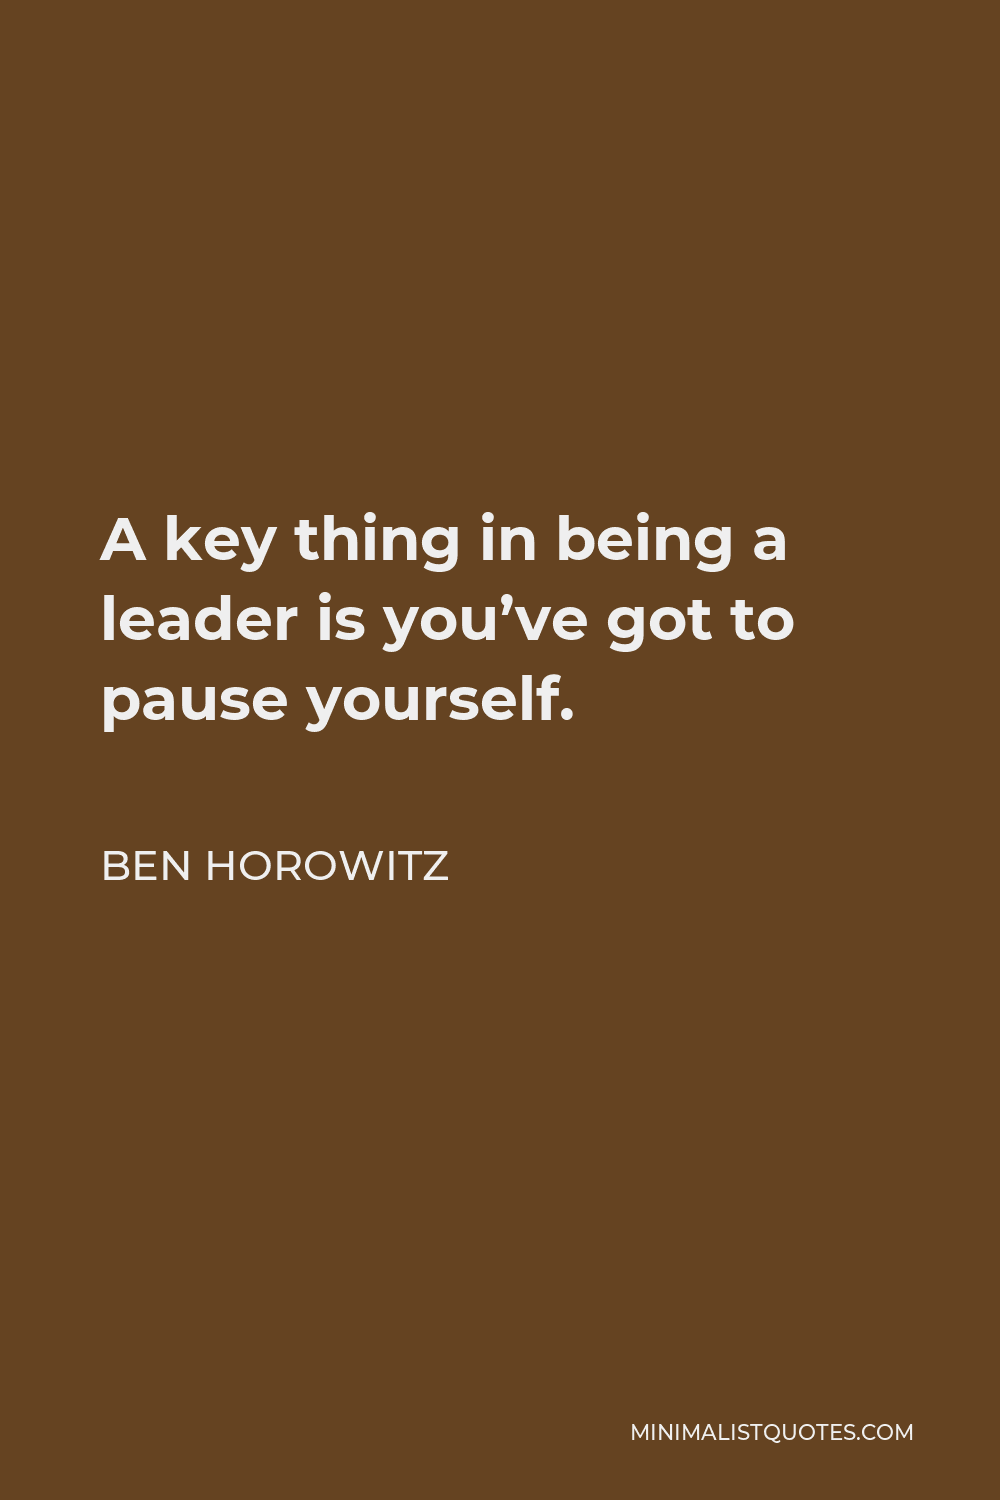 Ben Horowitz Quote - A key thing in being a leader is you’ve got to pause yourself.